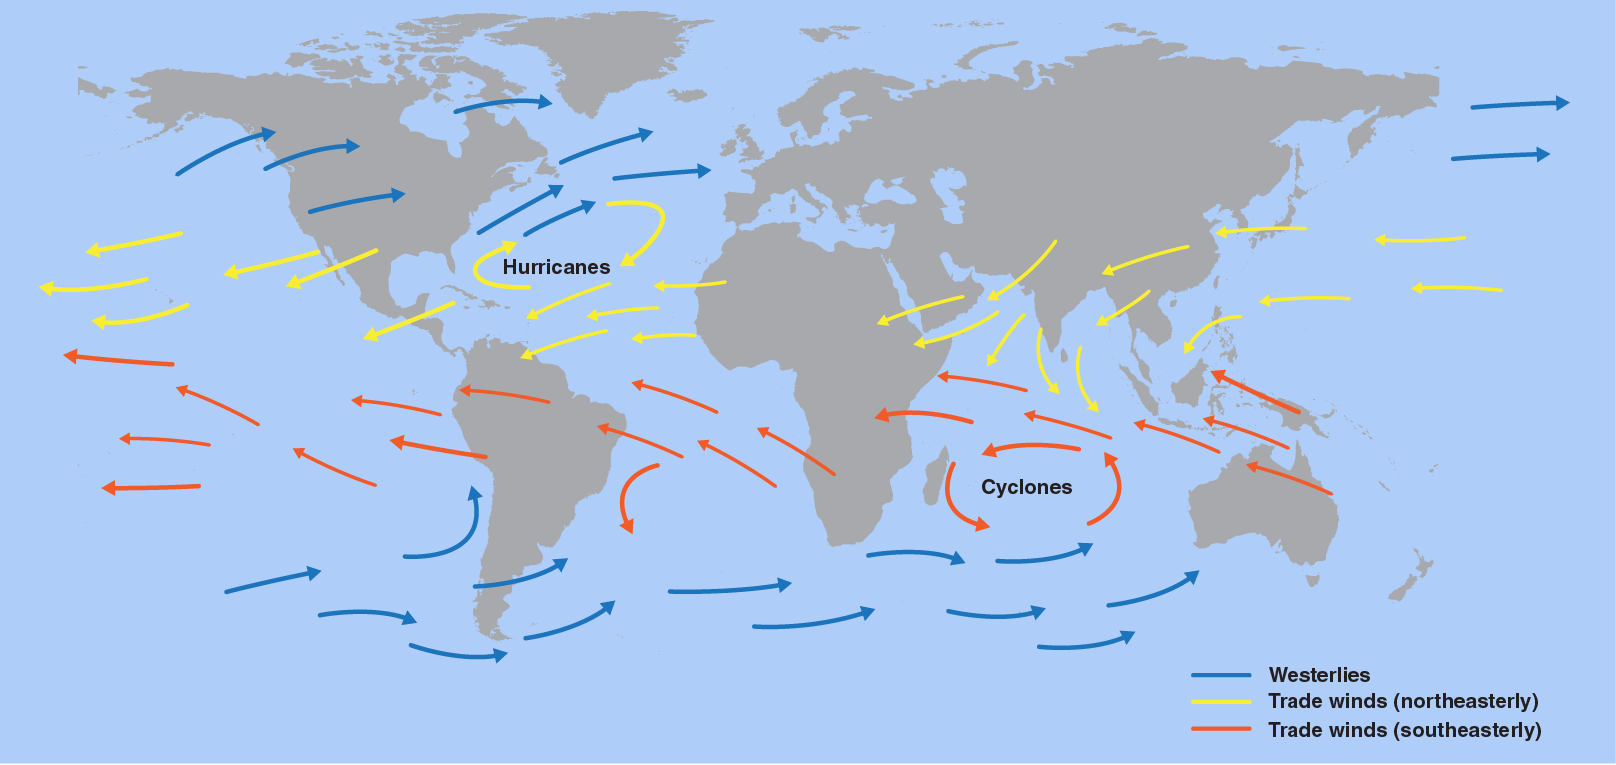 World map illustration with arrows representing trade winds.